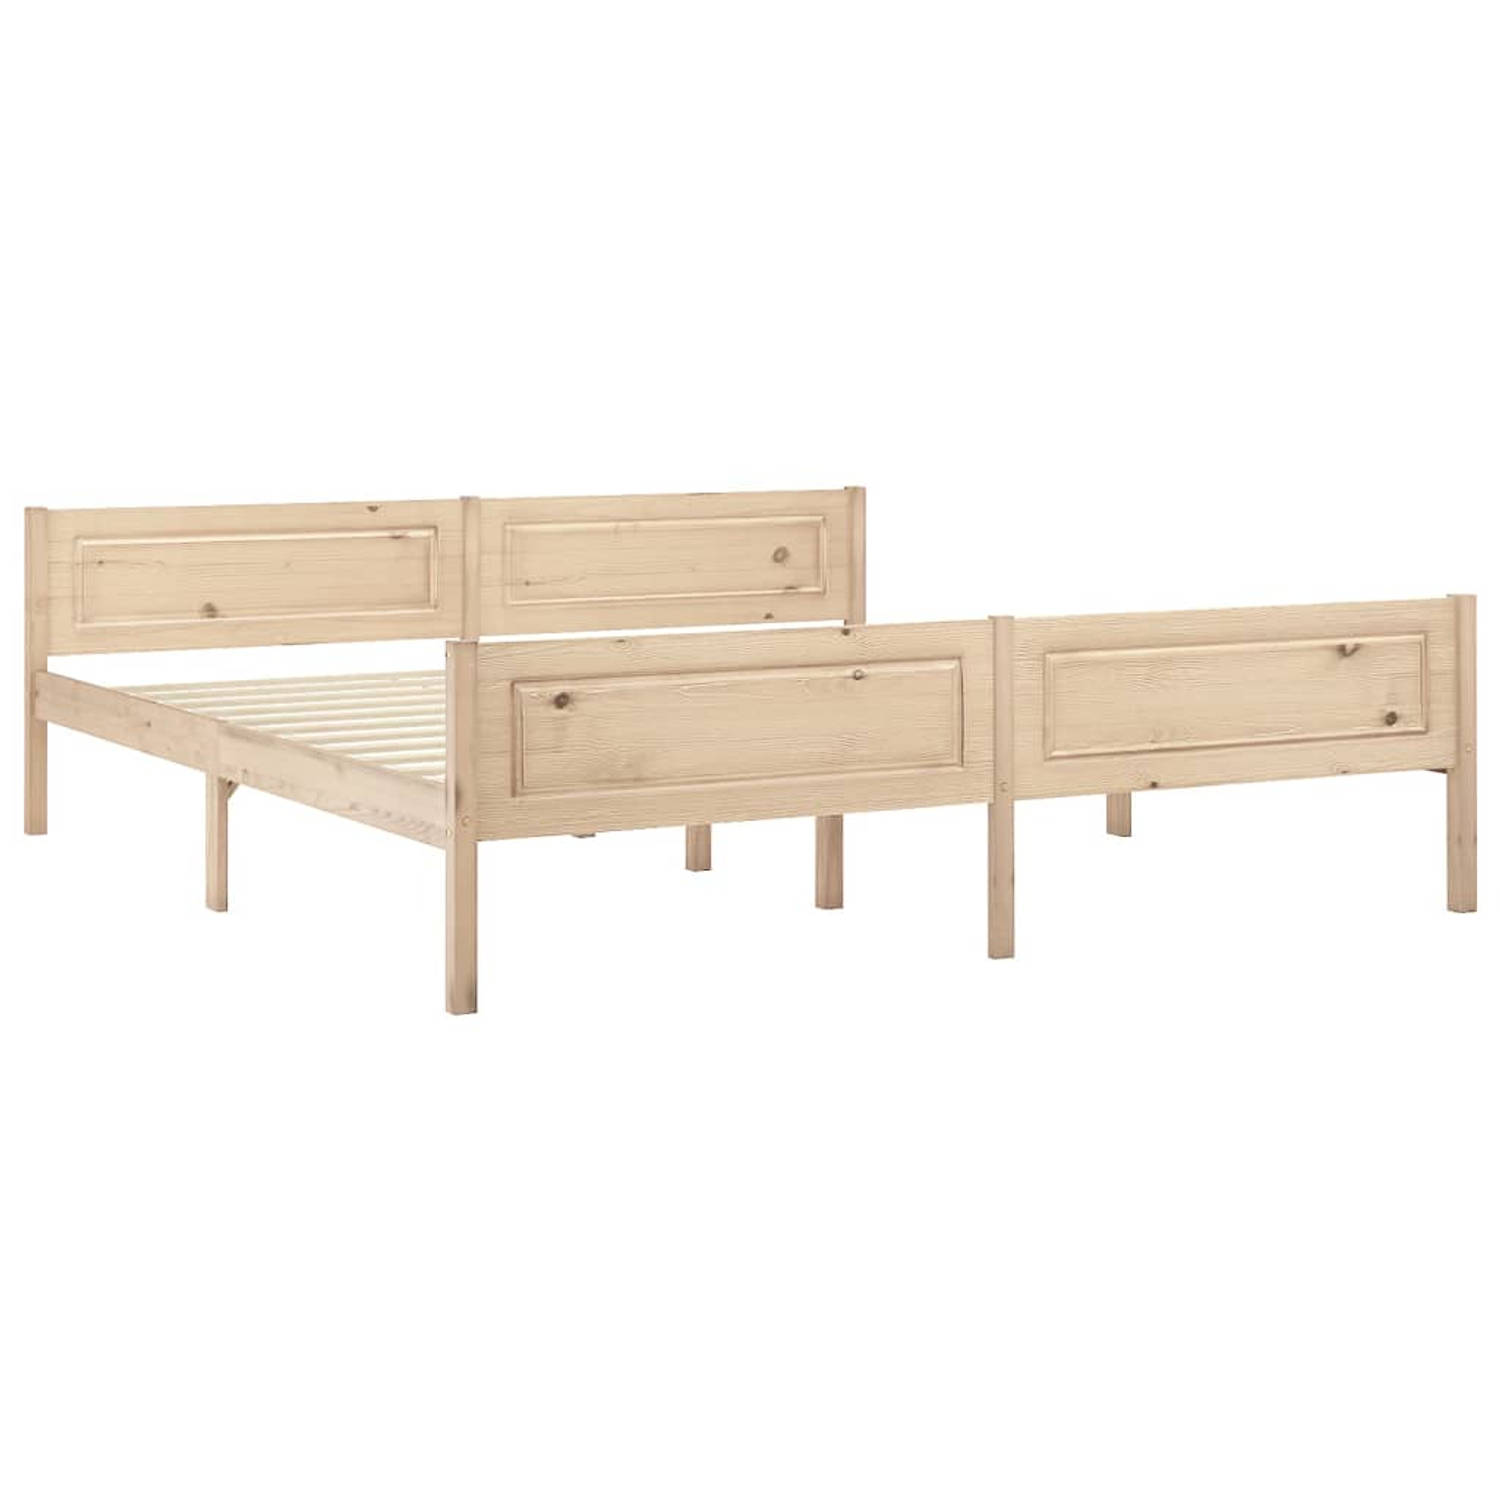 The Living Store Bedframe massief grenenhout 180x200 cm - Bedframe - Bedframe - Bed Frame - Bed Frames - Bed - Bedden - 2-persoonsbed - 2-persoonsbedden - Tweepersoons Bed